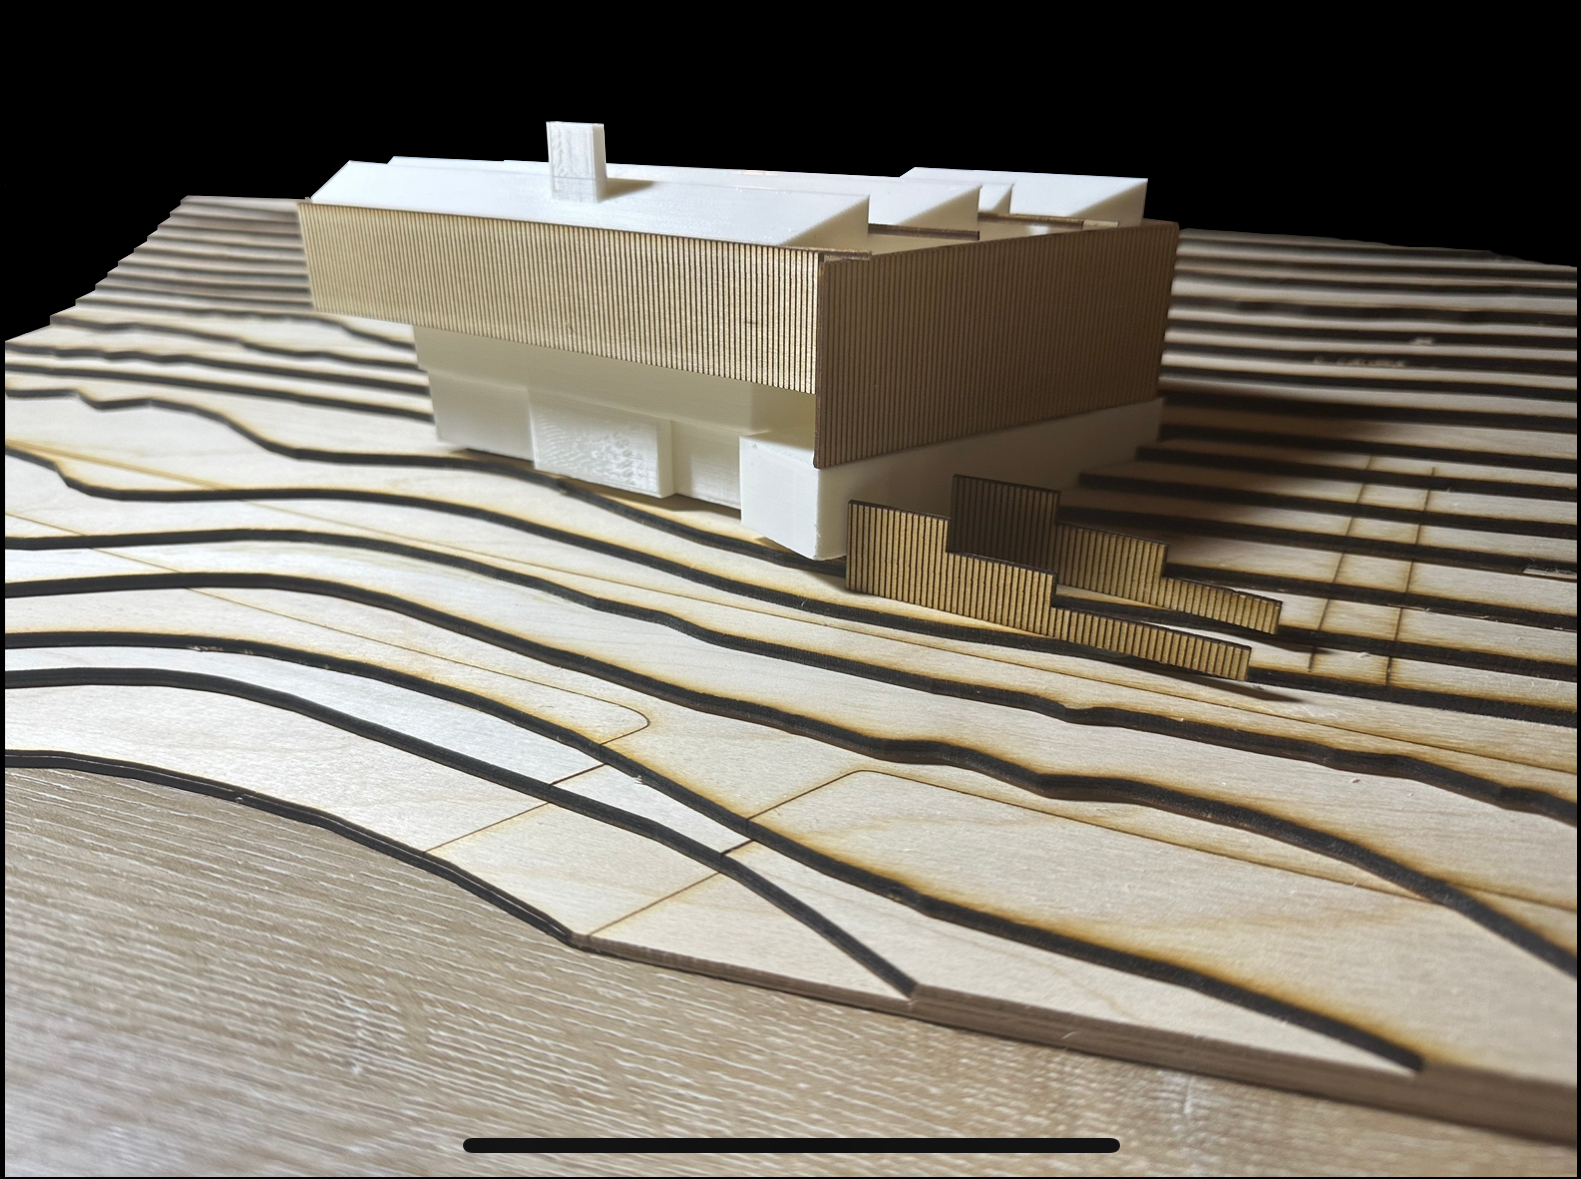 An image of the front face of a model of a building